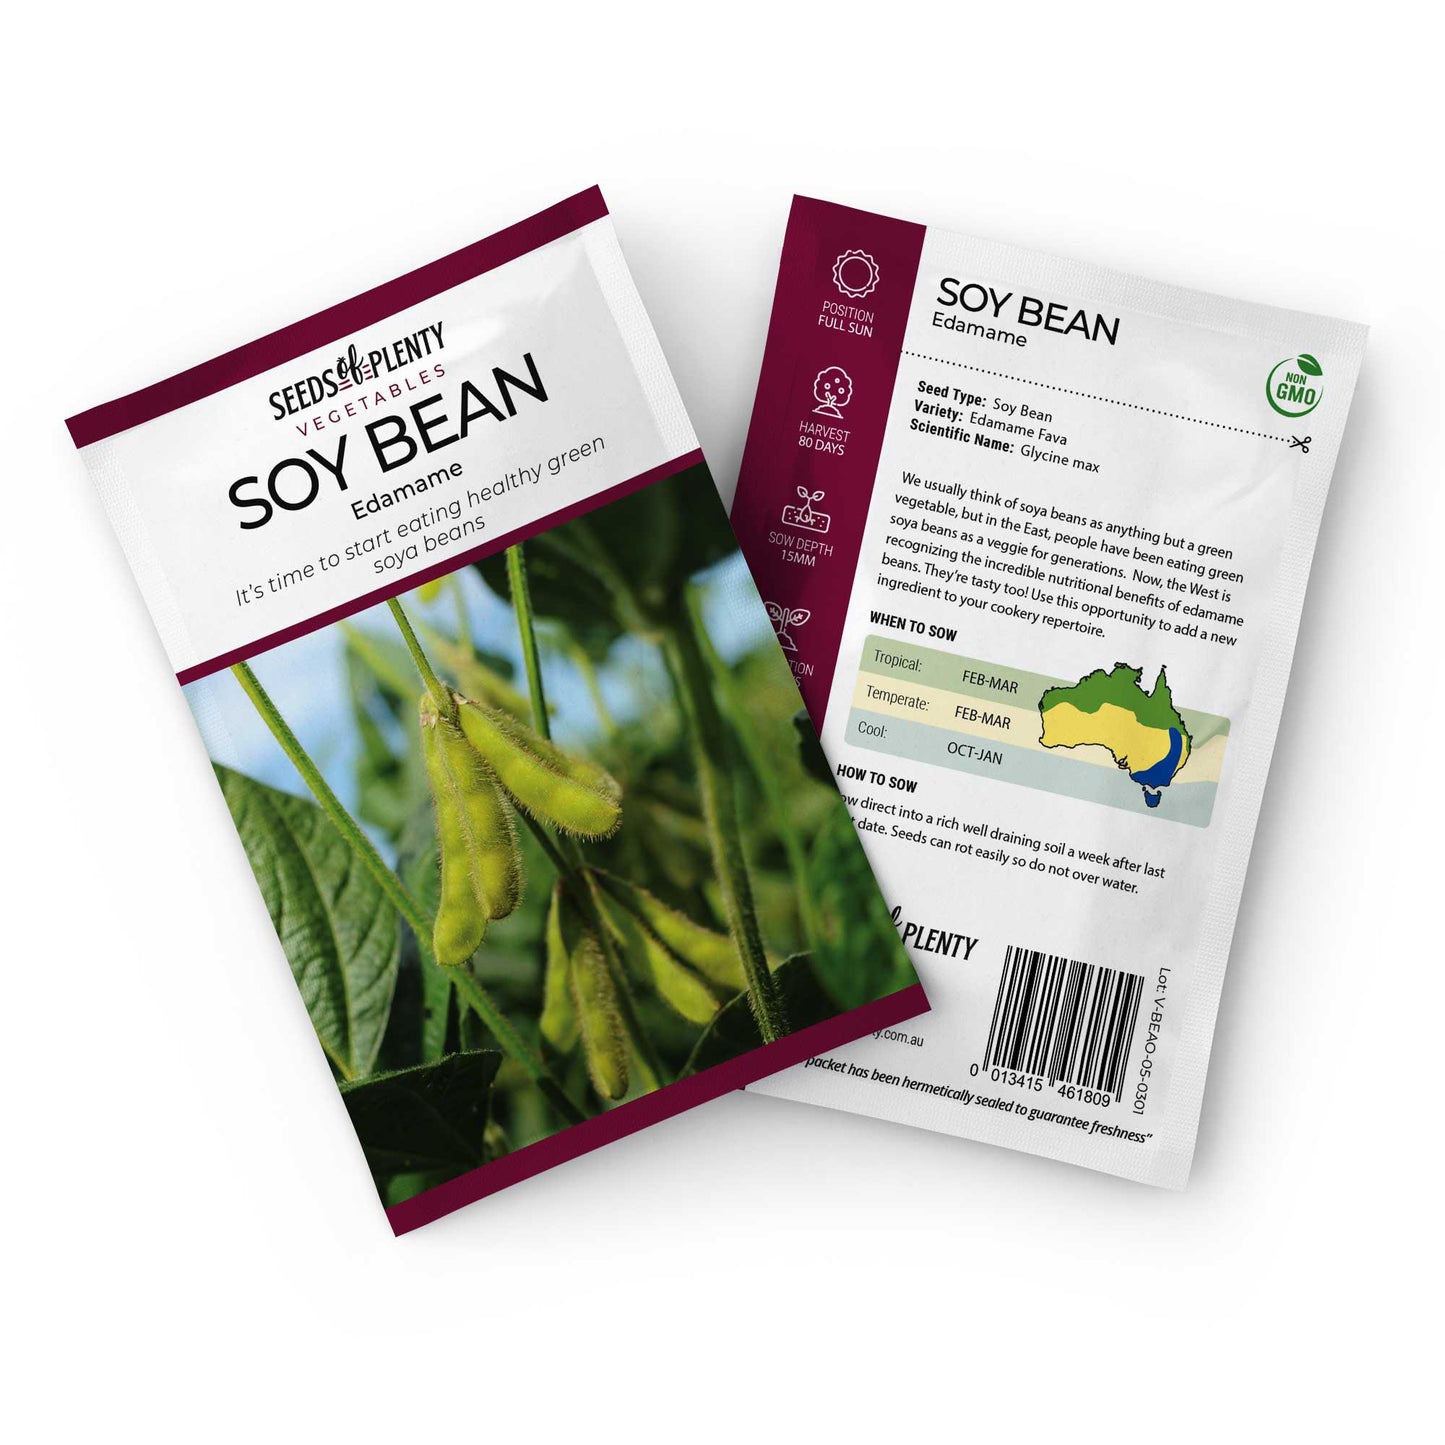 SOY BEAN - Edamame Seed Packet - Vicia faba